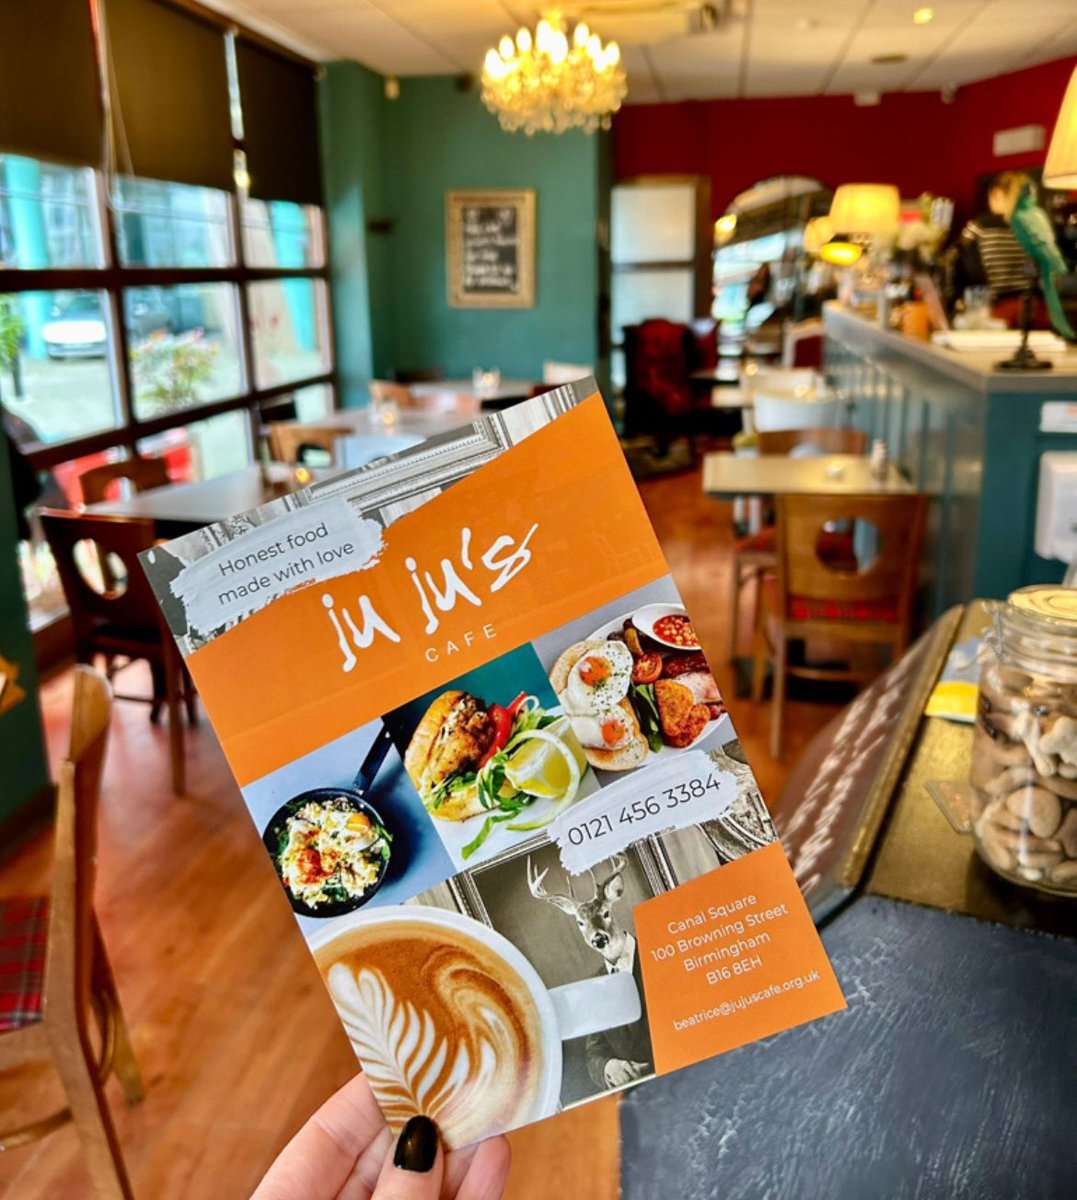 It’s that time of the week again! We’re open from 5pm serving up all of your favourites plus some brand new seasonal treats from our new spring menu. The gang will be on hand to make sure your weekend is delicious - see you at JuJu’s 🧡